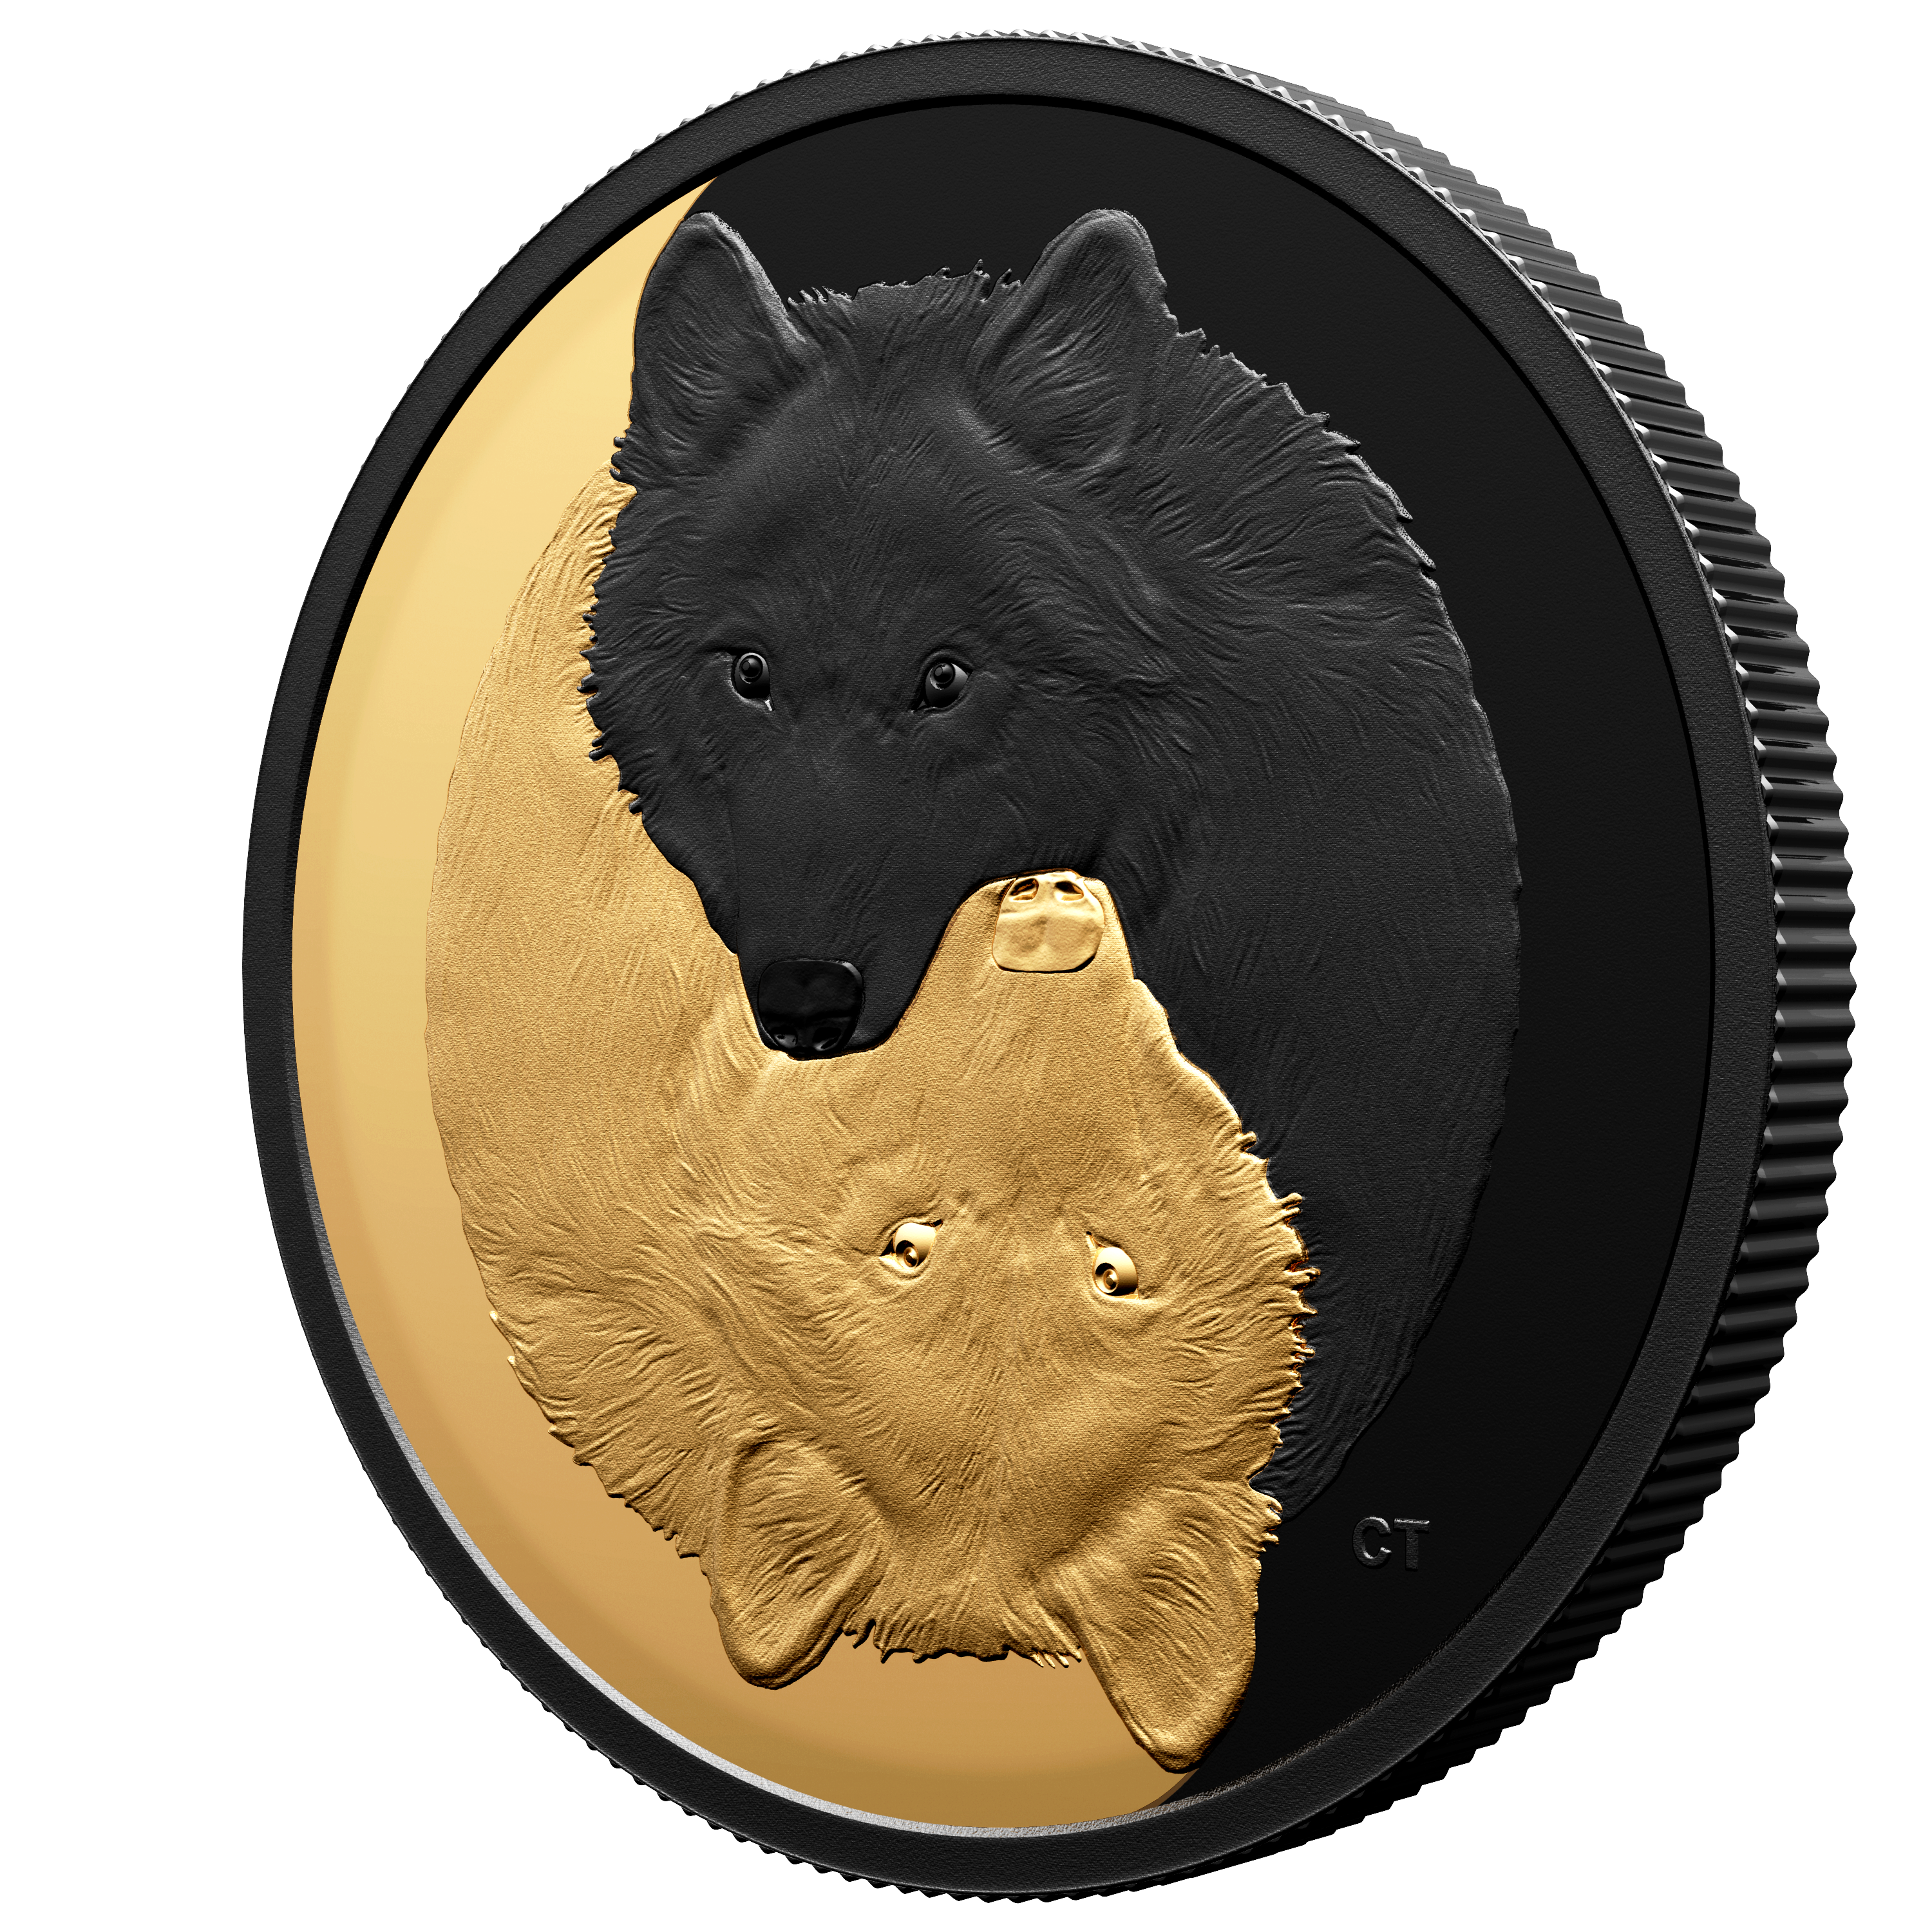 GREY WOLF Black and Gold Silver Coin $20 Canada 2021